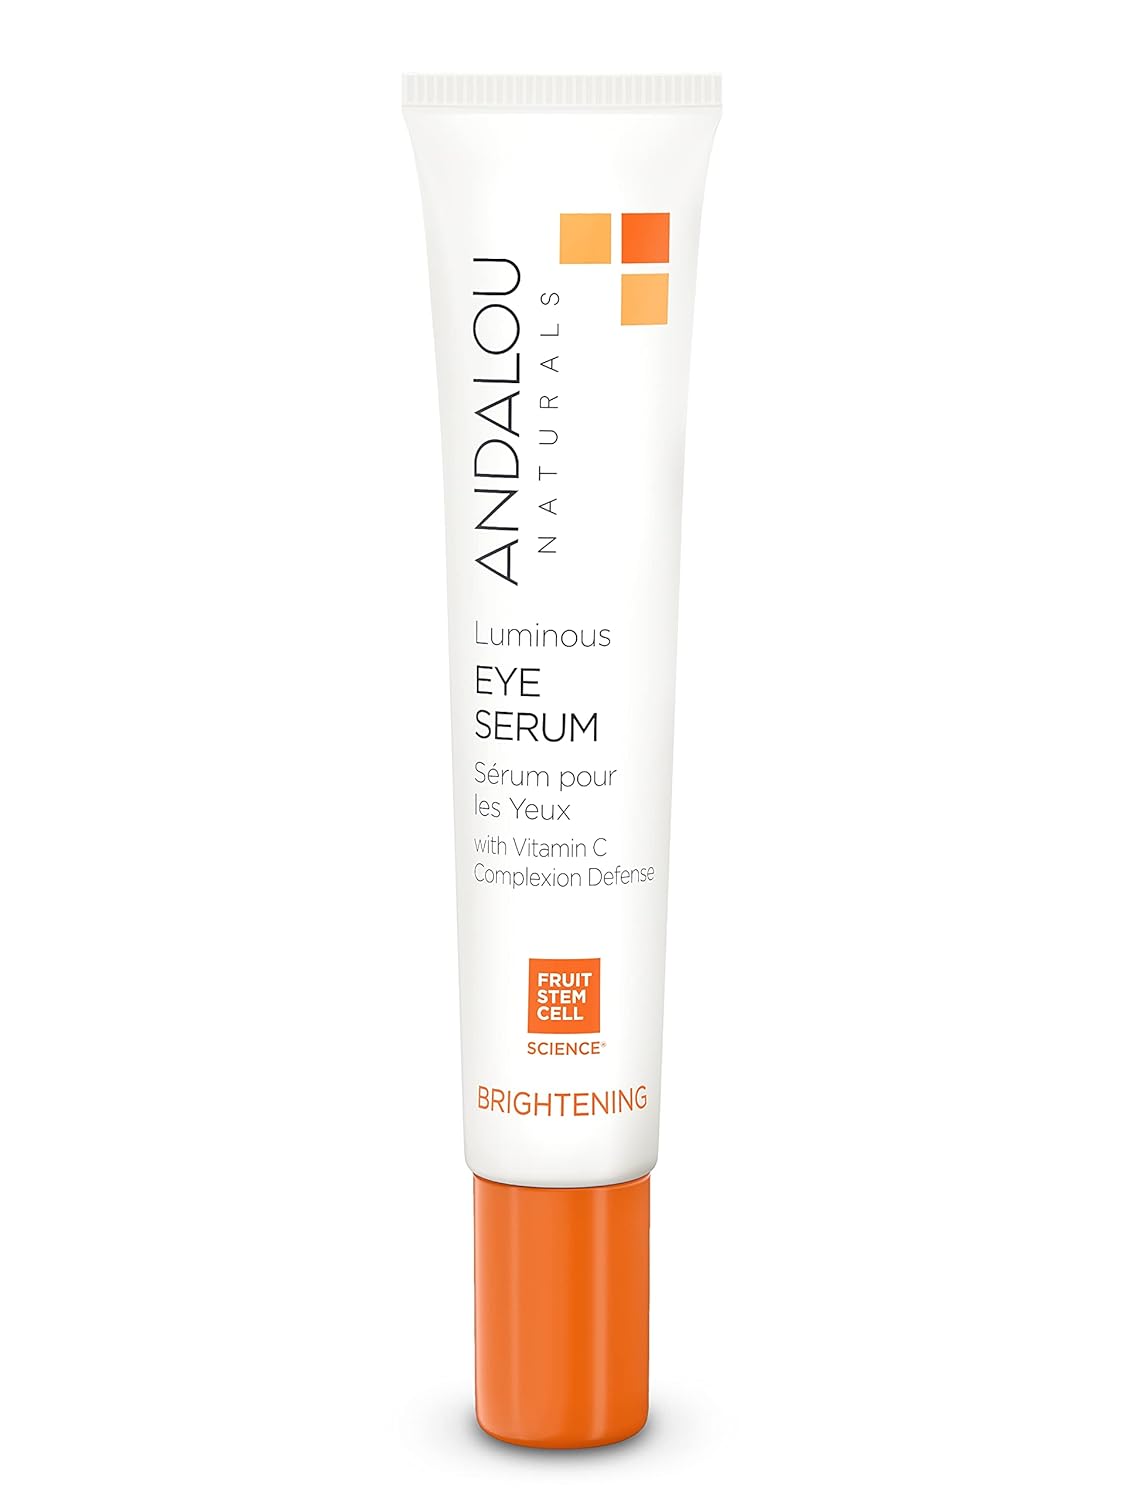 Andalou Naturals Luminous Eye Serum, Brightening Eye Cream for Dark Circles and Puffiness, Vitamin C, Caffeine & Goji Glycopeptides for a Lighter, Tighter, Brighter Appearance, 0.6 Ounce